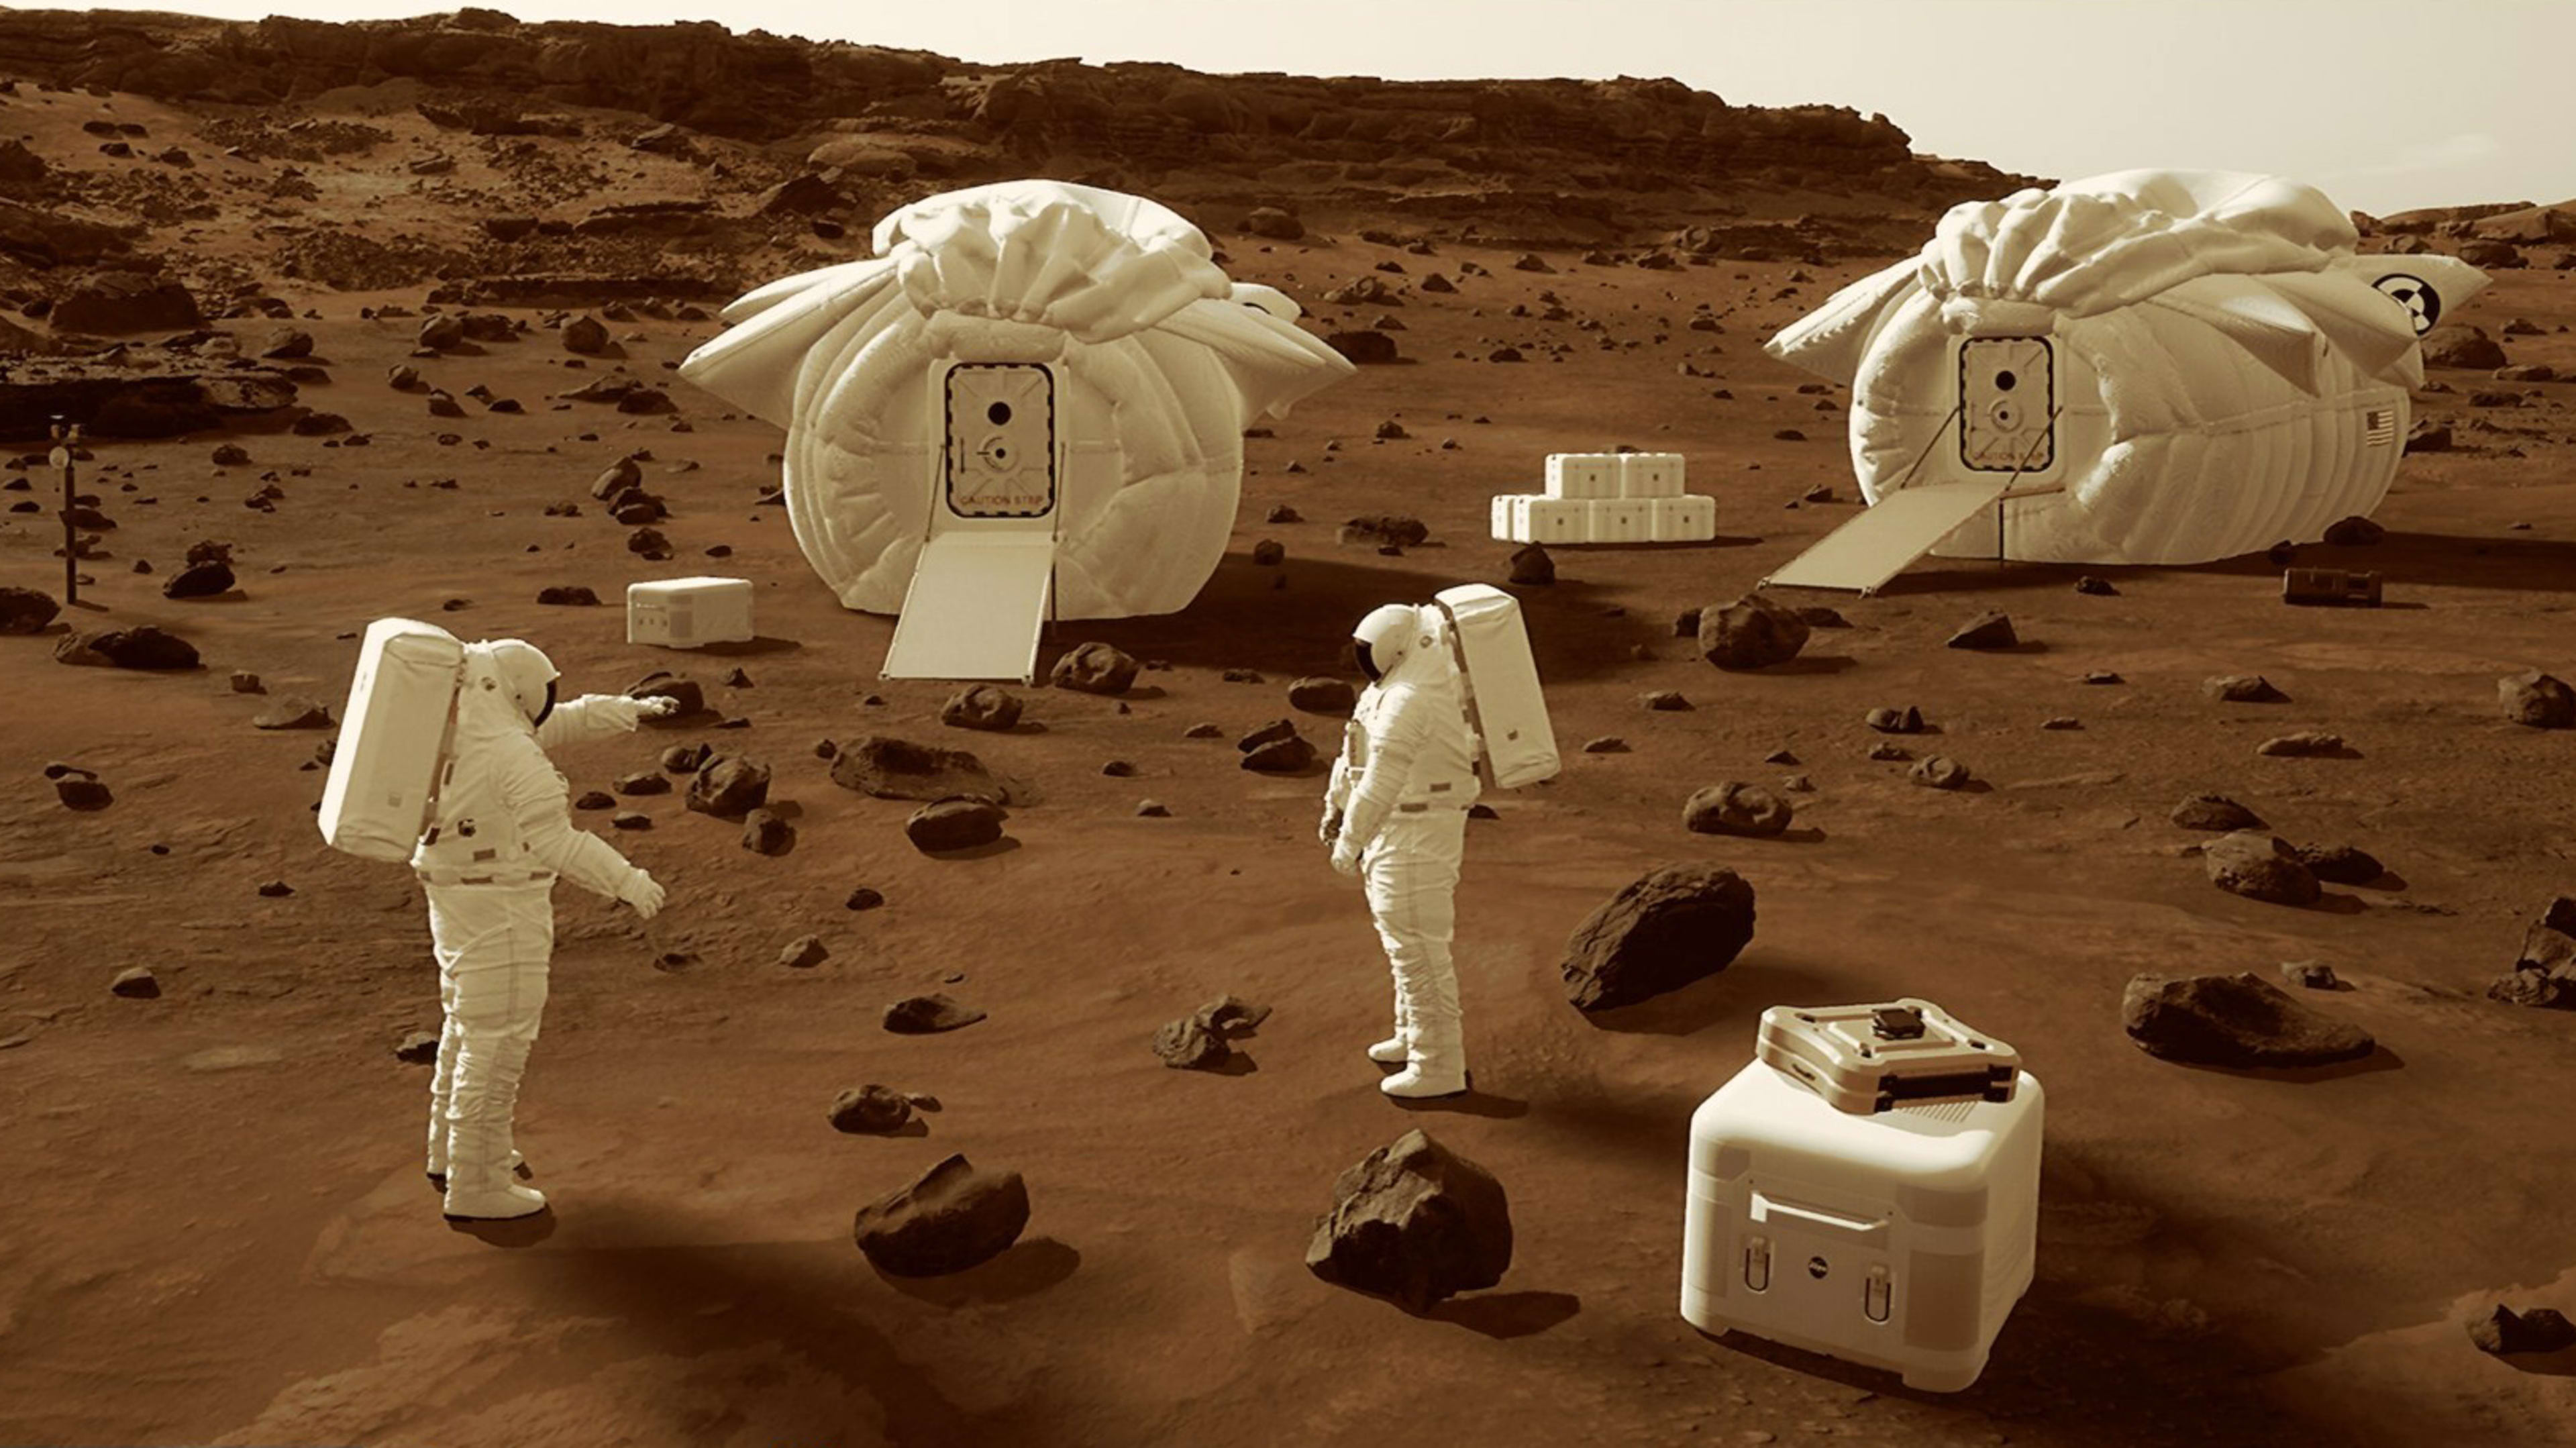 NASA is hosting a competition to build a VR Mars simulator